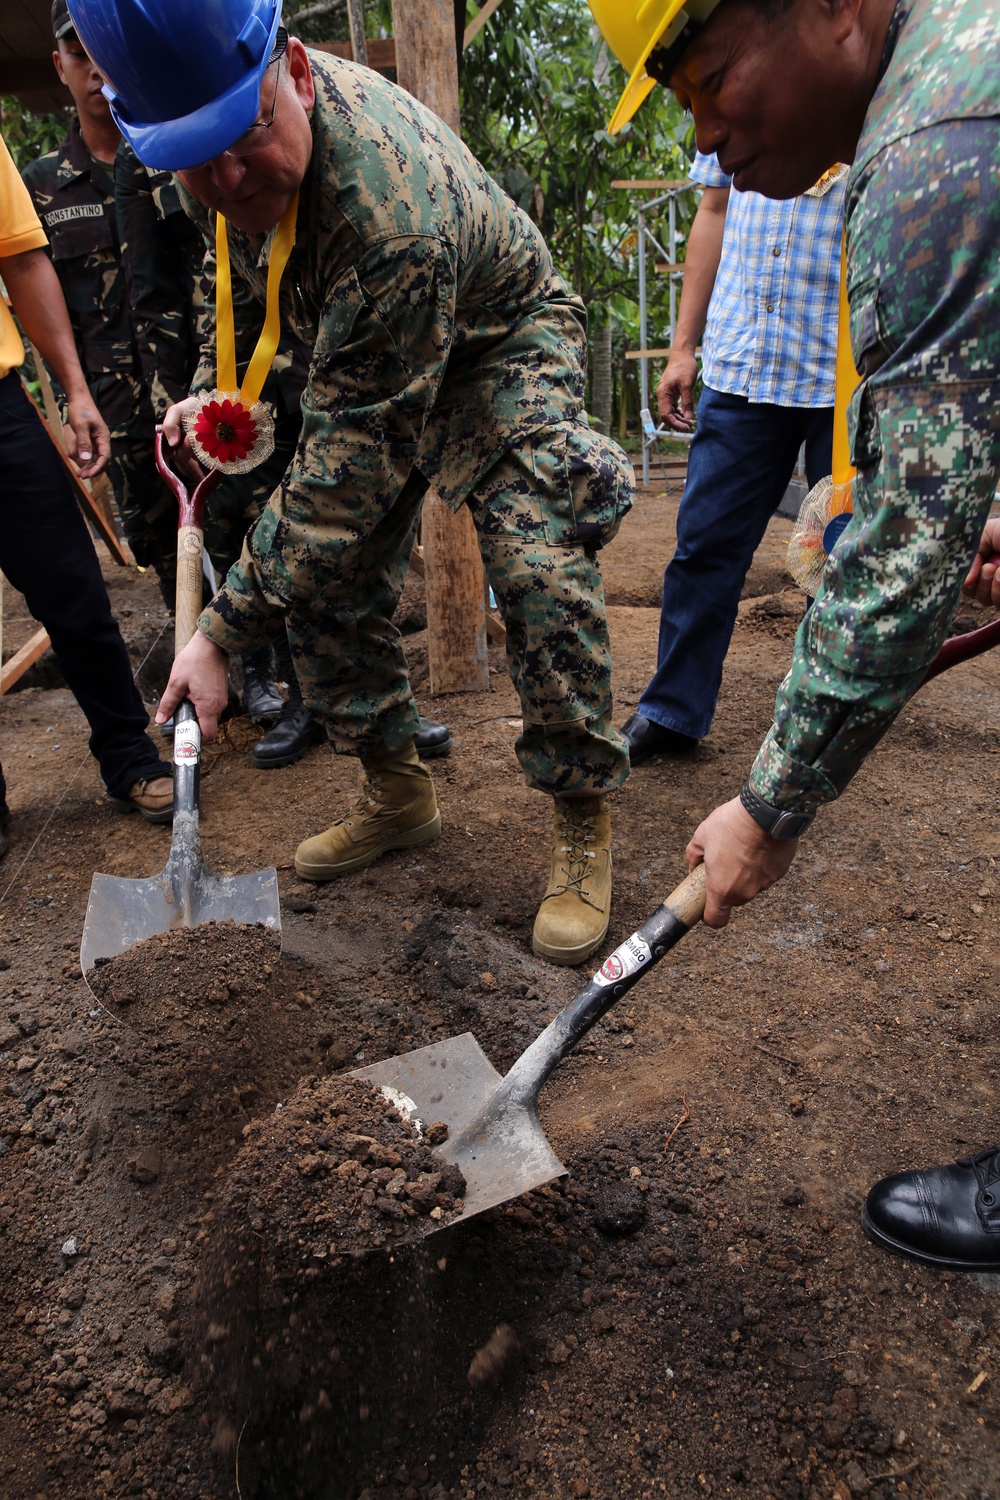 AFP, U.S. break ground with community members on HCA projects